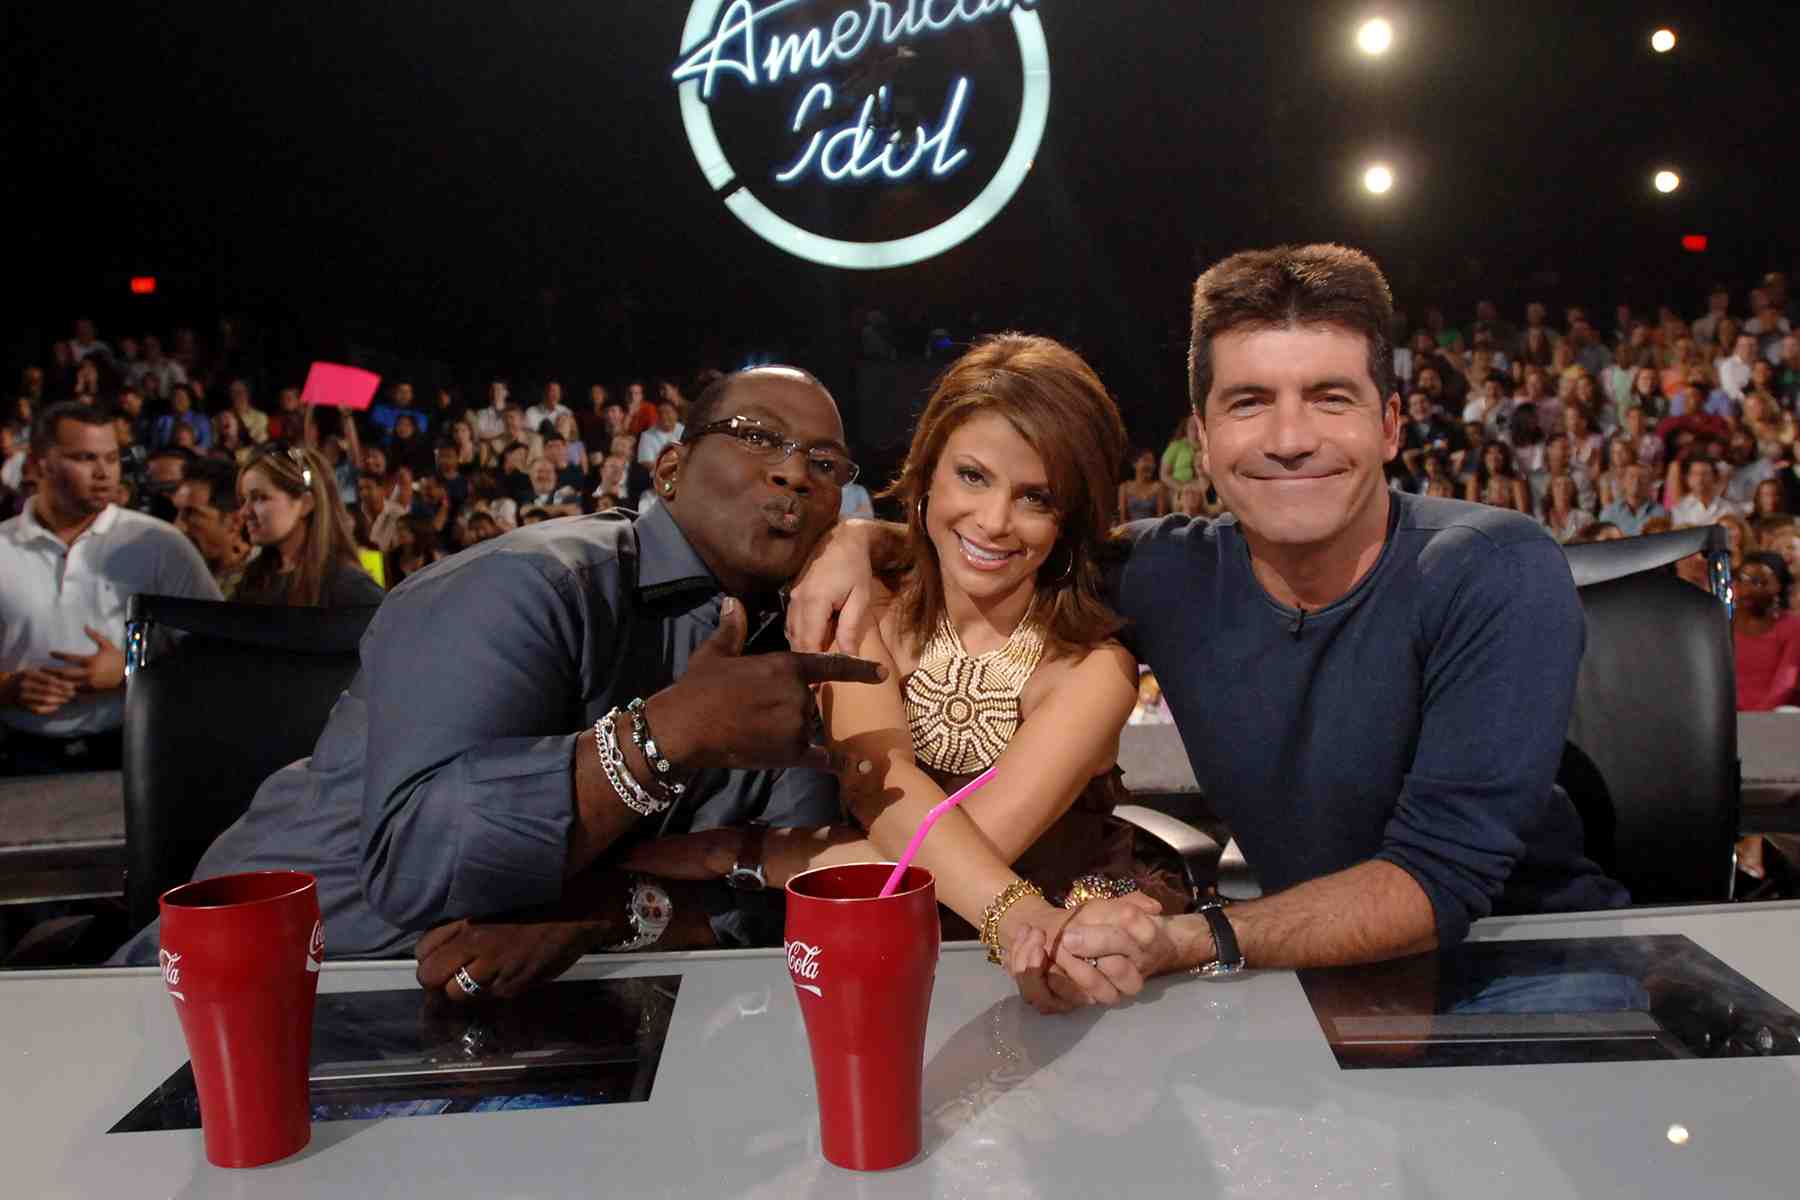 Storm brewing over American Idol 2024: Will audiences finally see the curtain fall on the show's toxic producers? Tune in and follow this tale of TV treachery!